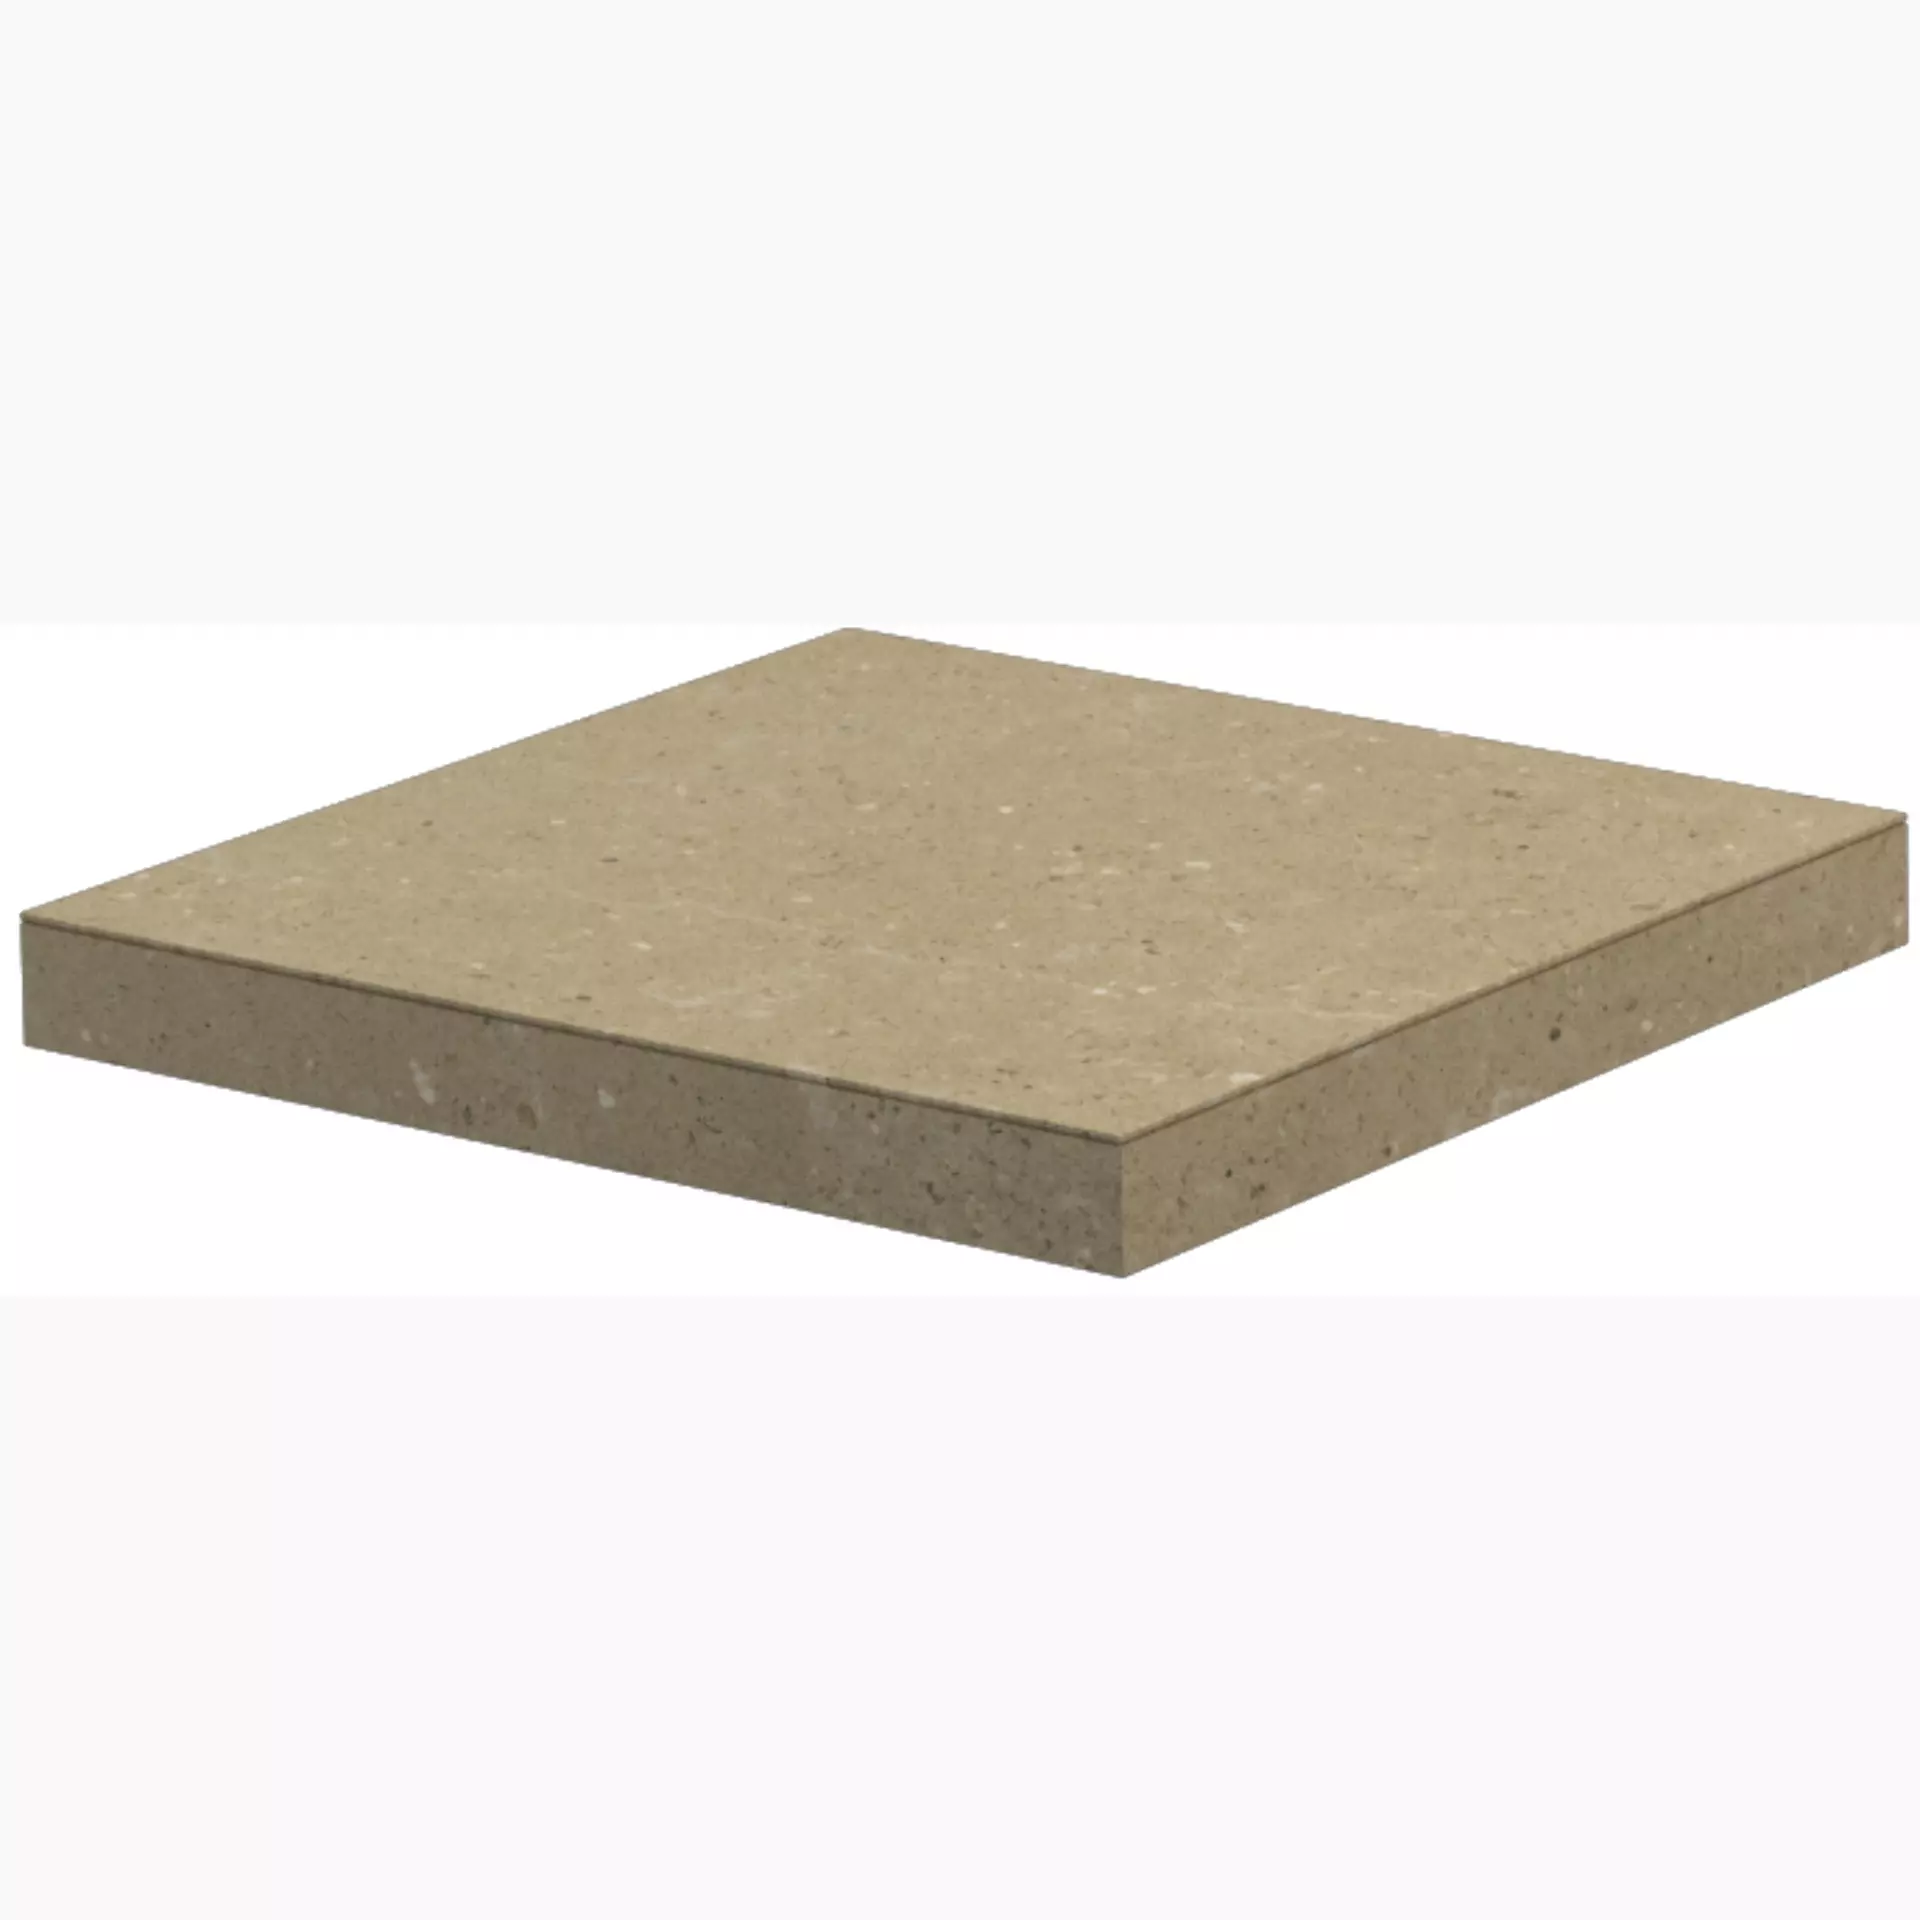 Del Conca Hwd Wild Beige Hwd01 Naturale Corner plate Step Left G3WD01RGS 33x33cm rectified 8,5mm